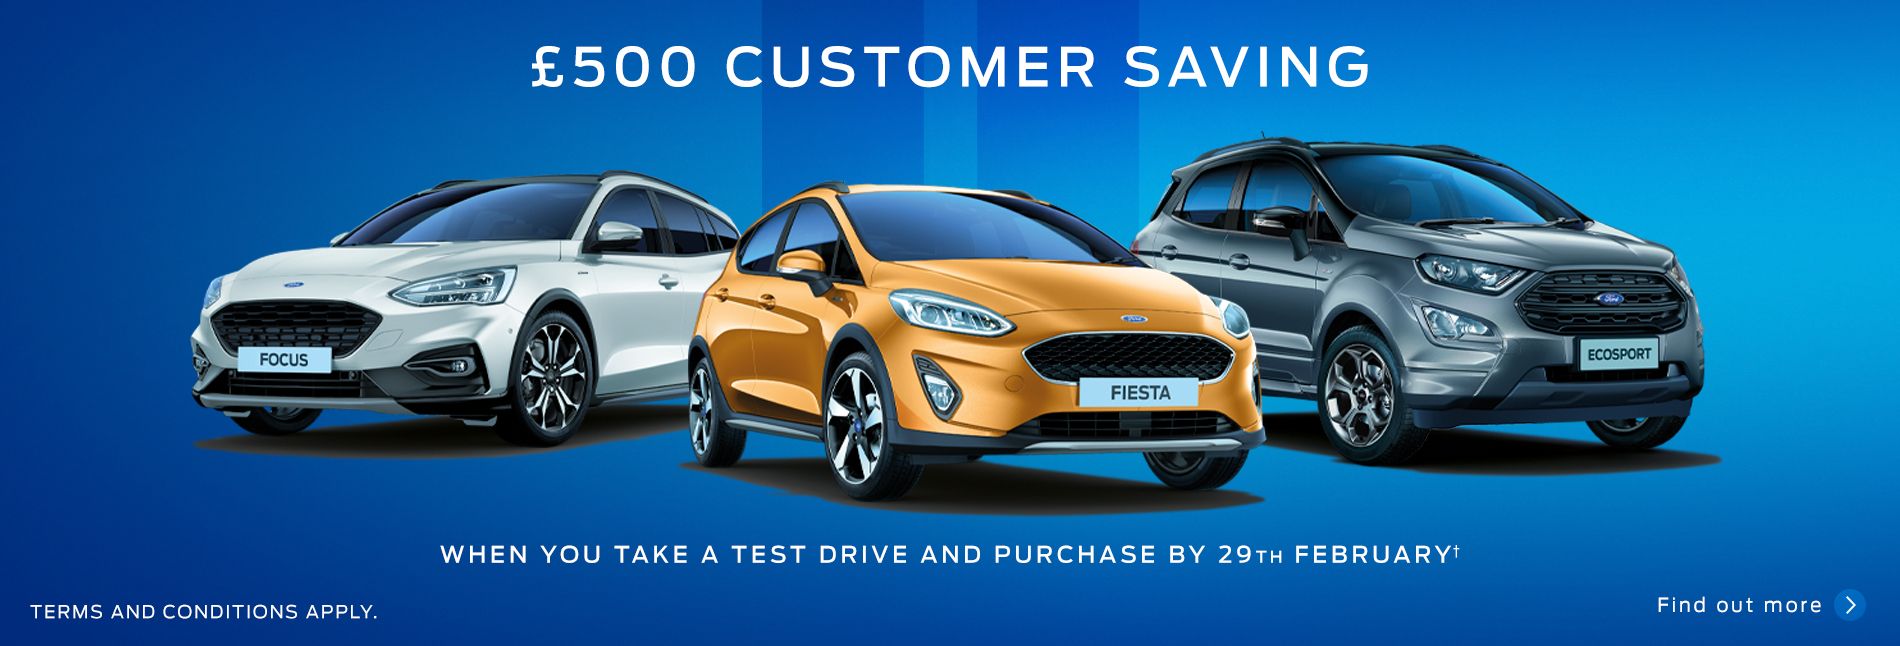 February Test Drive Promotion